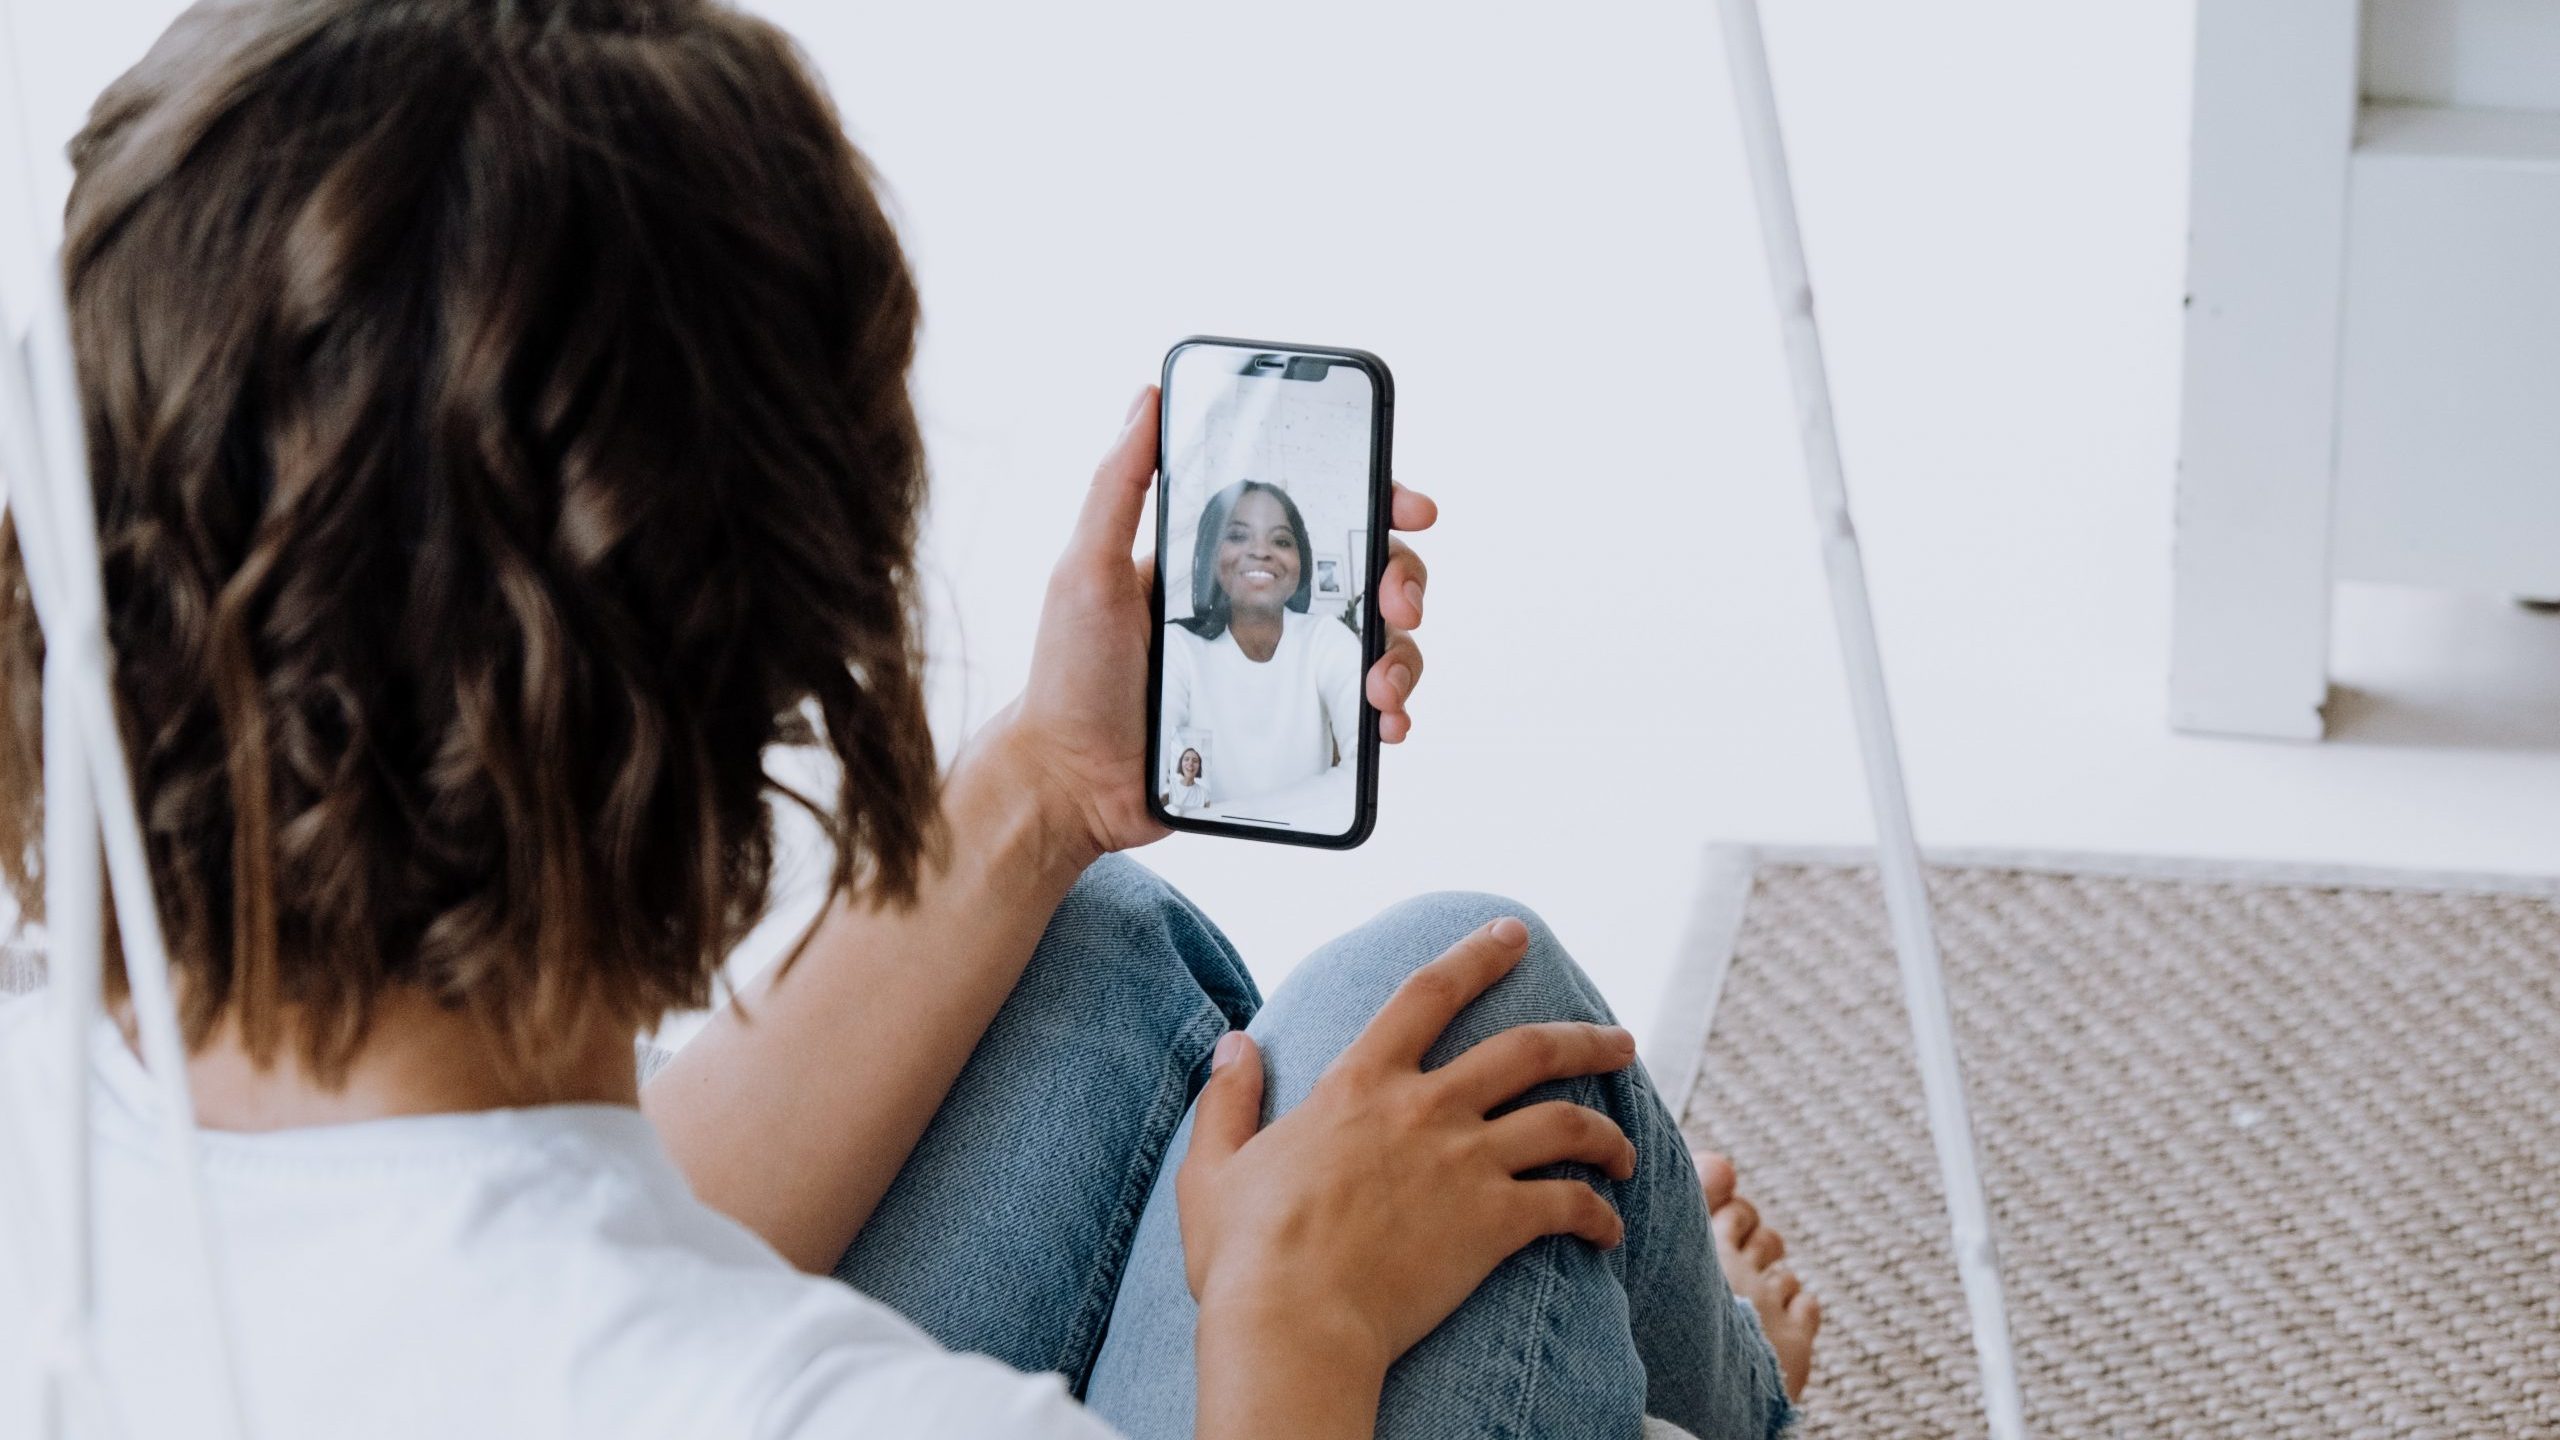 A woman sits on steps as she uses an iPhone to FaceTime a friend.